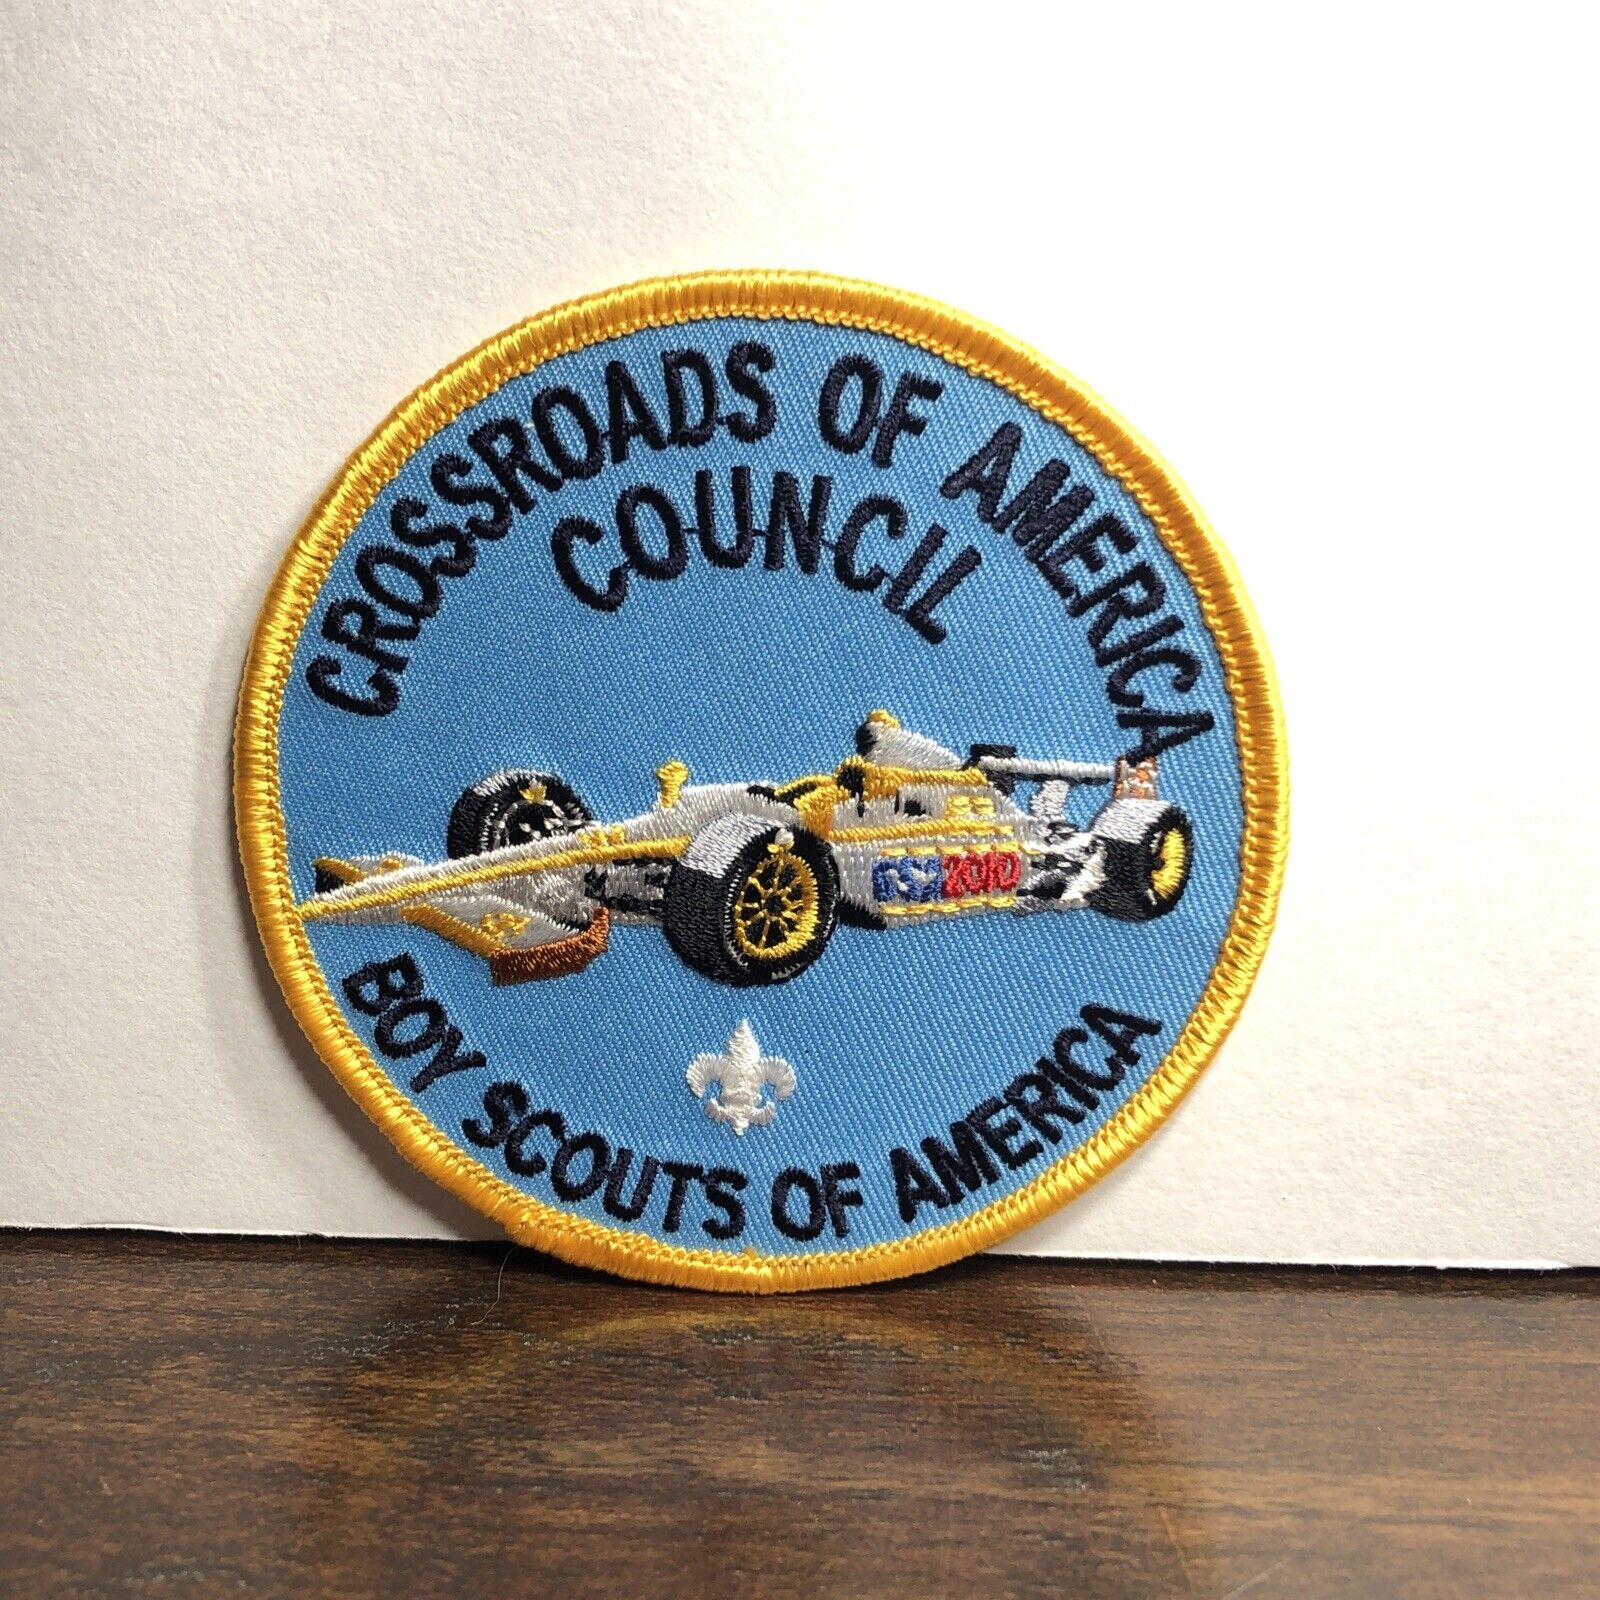 BSA Crossroads Of America Council 2010 Indy Car Patch